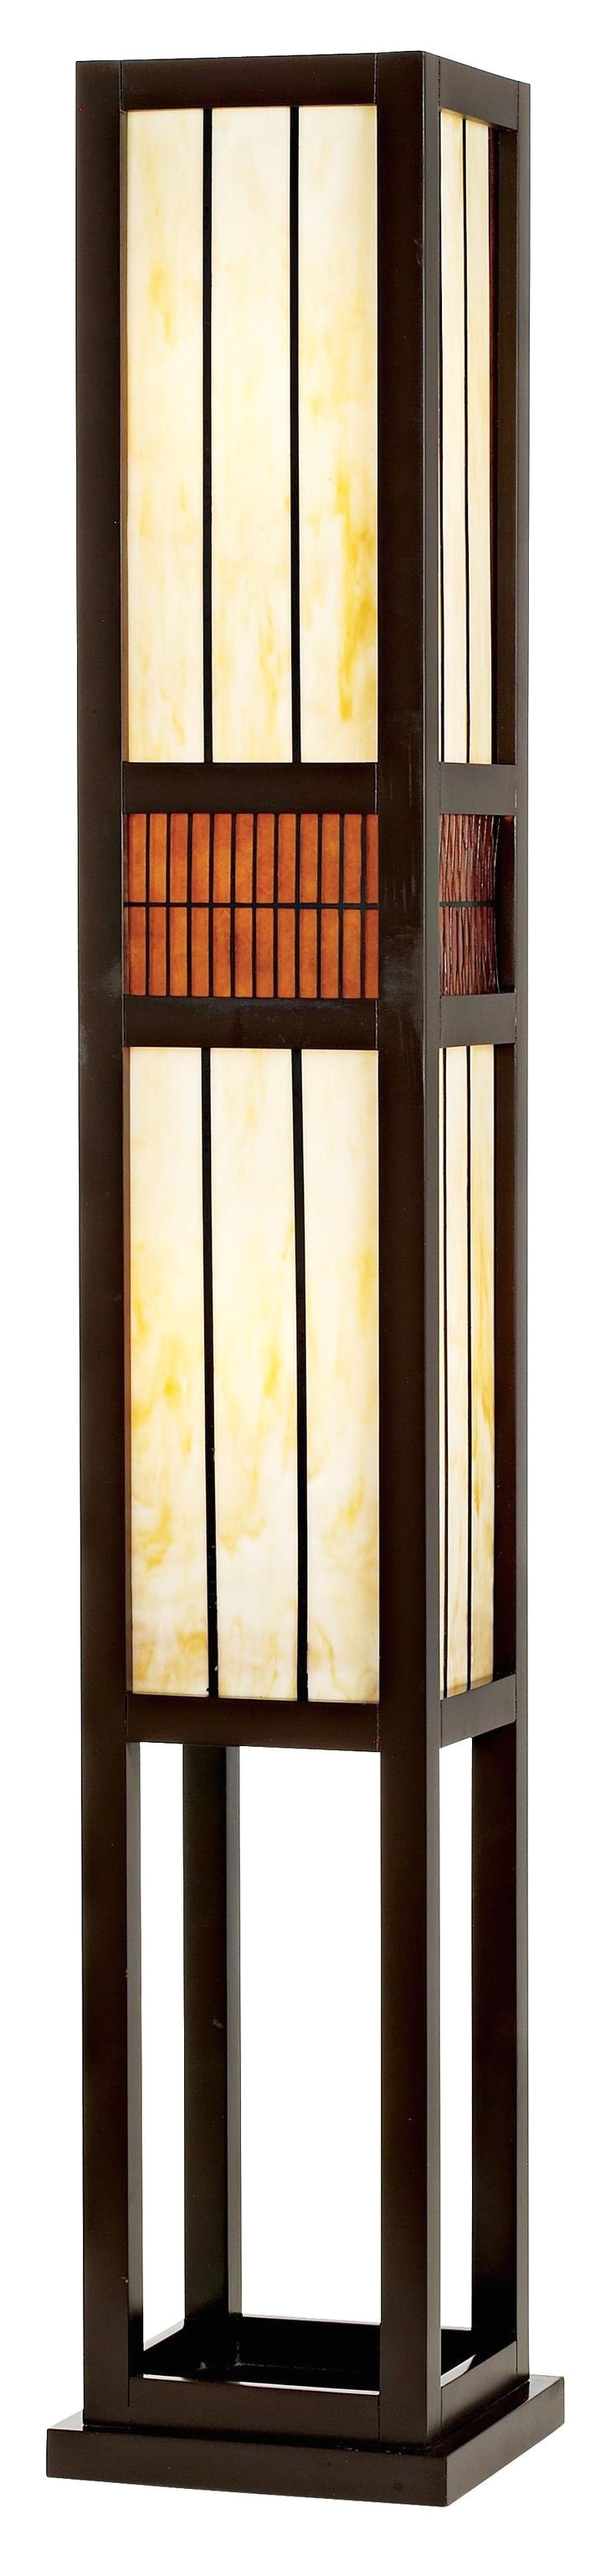 glamorous standing lamps for bedroom at funeral home floor lamps unique lamps round lamp round lamp 0d